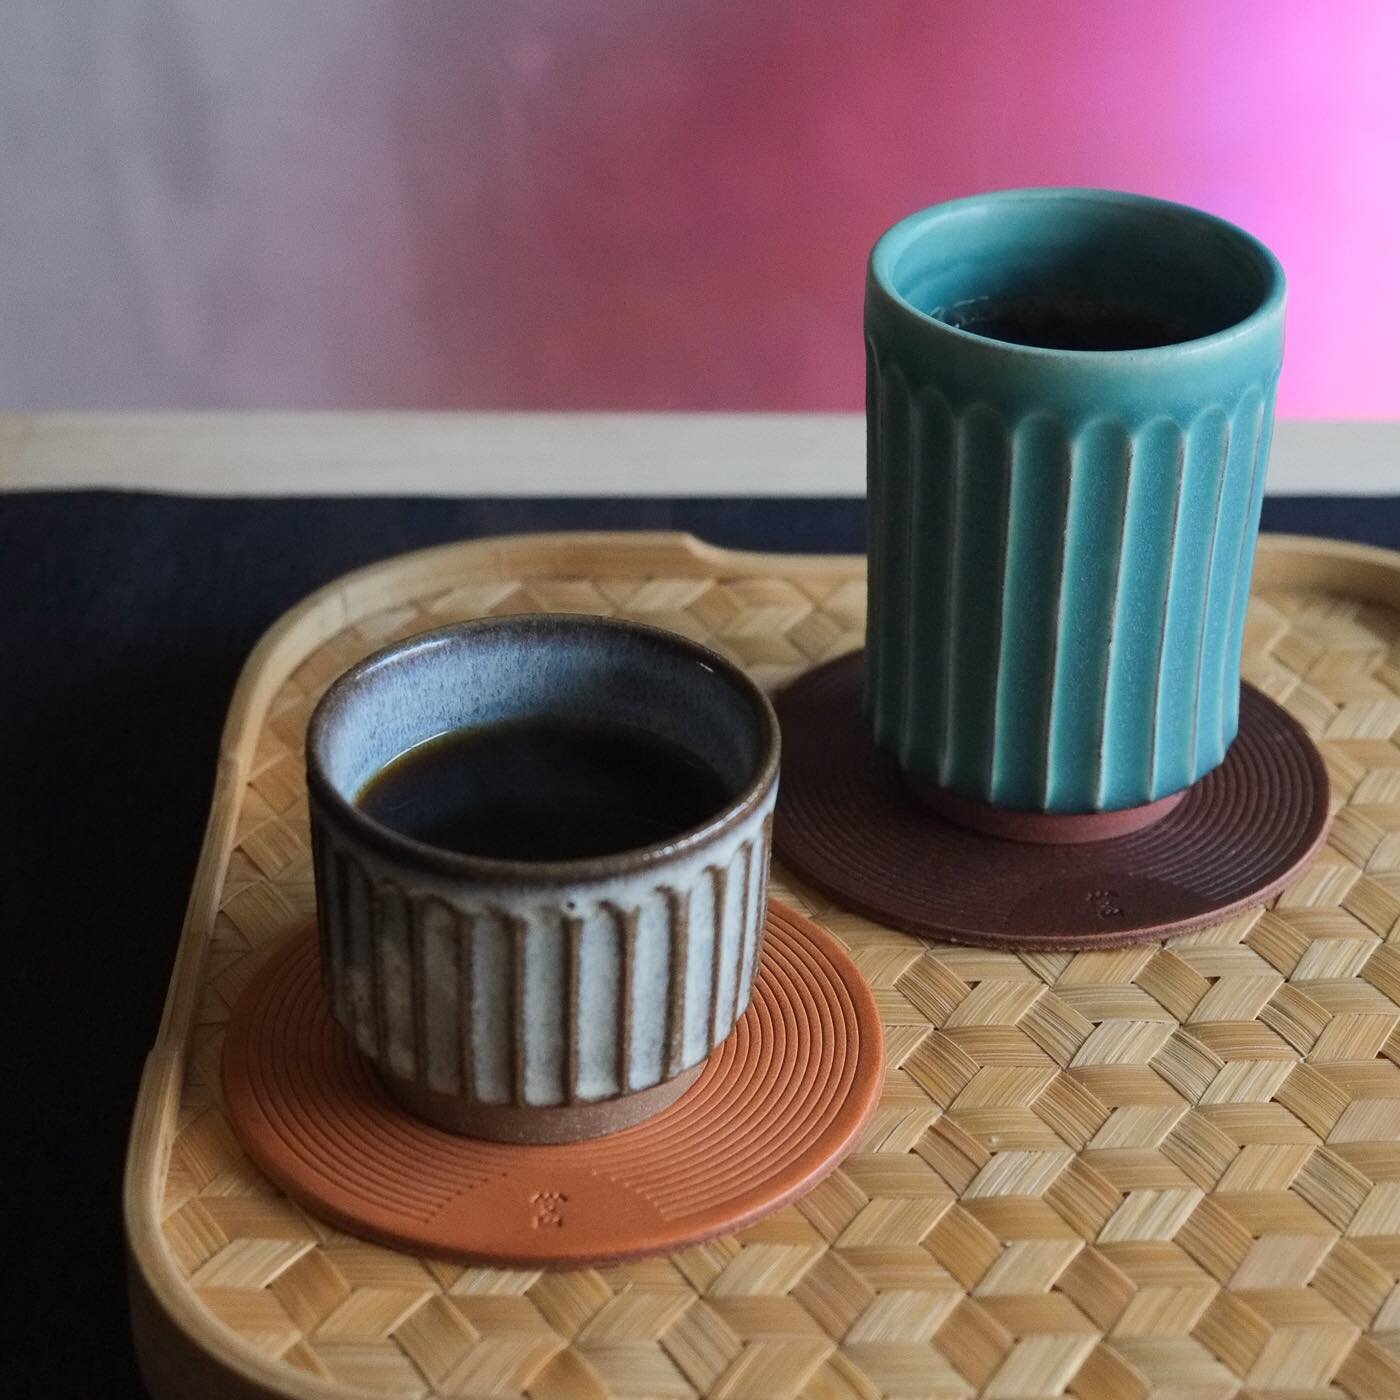 Our Tanba-yaki cups seamlessly blend extraordinary functionality with exquisite beauty in a single work of art.

アセミコの丹波焼は絶妙な美しさと実用性に優れたカップです。
.
 .
 .
 .
 .
 .
 .
 .
 .
 .
 .
 .
 .
 .
 .
 .
 .
 .
 .
 .
 .
 .
 .
 .
 .
 .
 #madeinjapan #pottery  #ceram